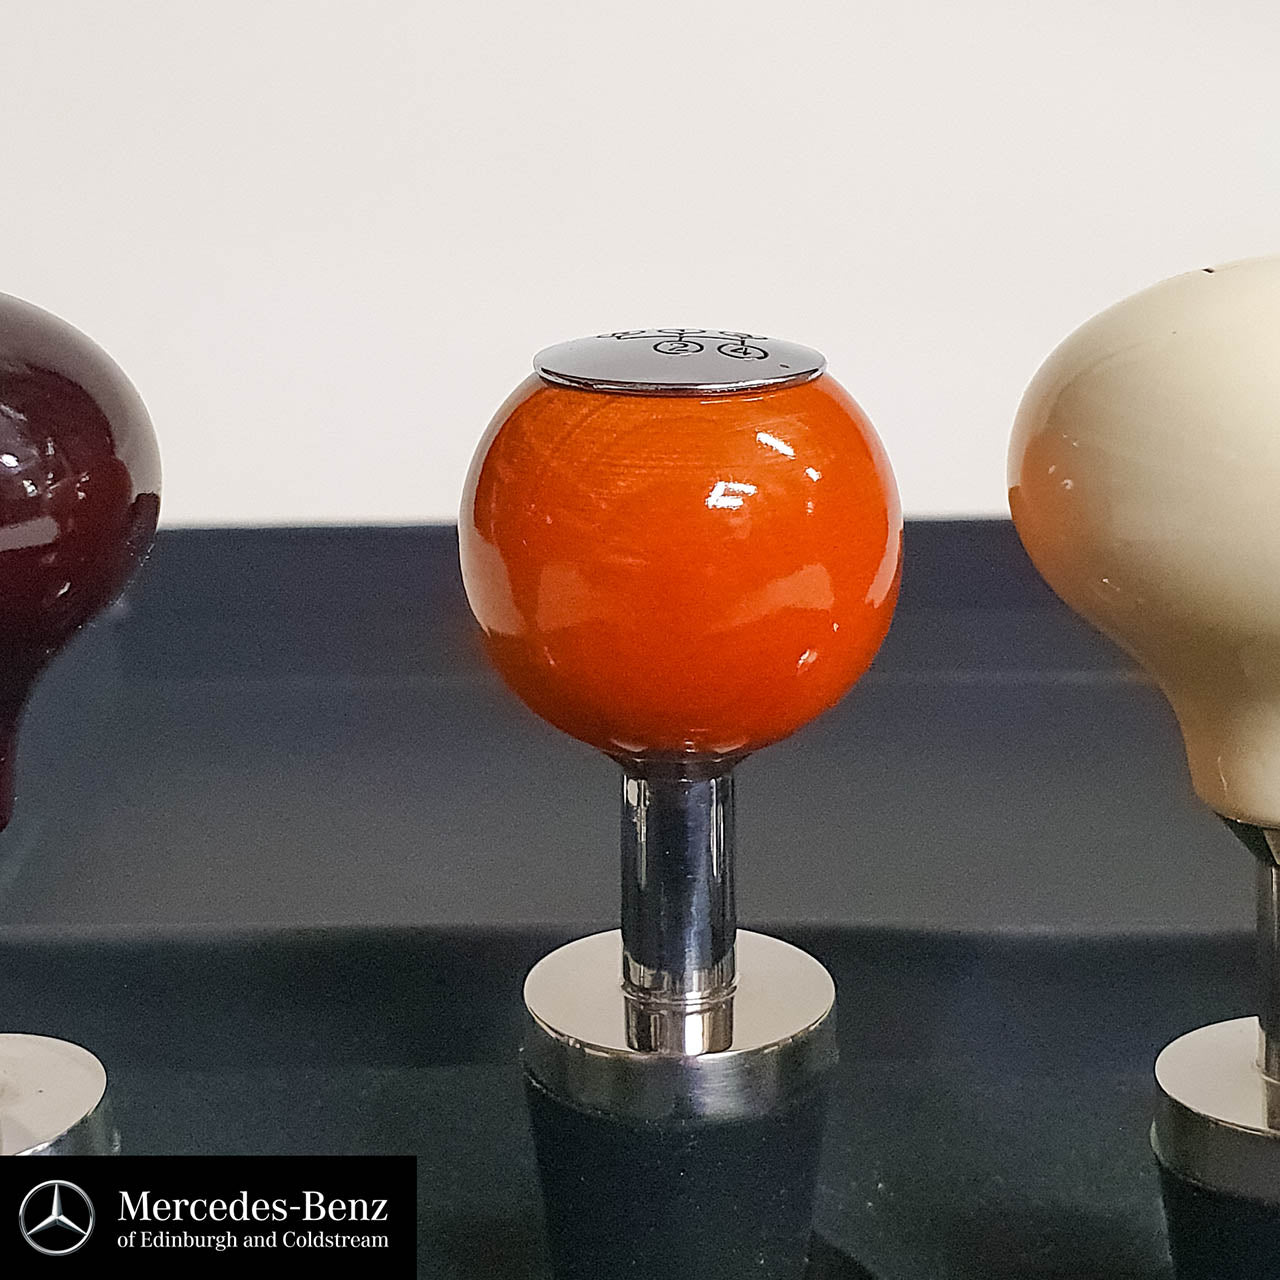 Mercedes wine stoppers, Set of 4 gear knob style